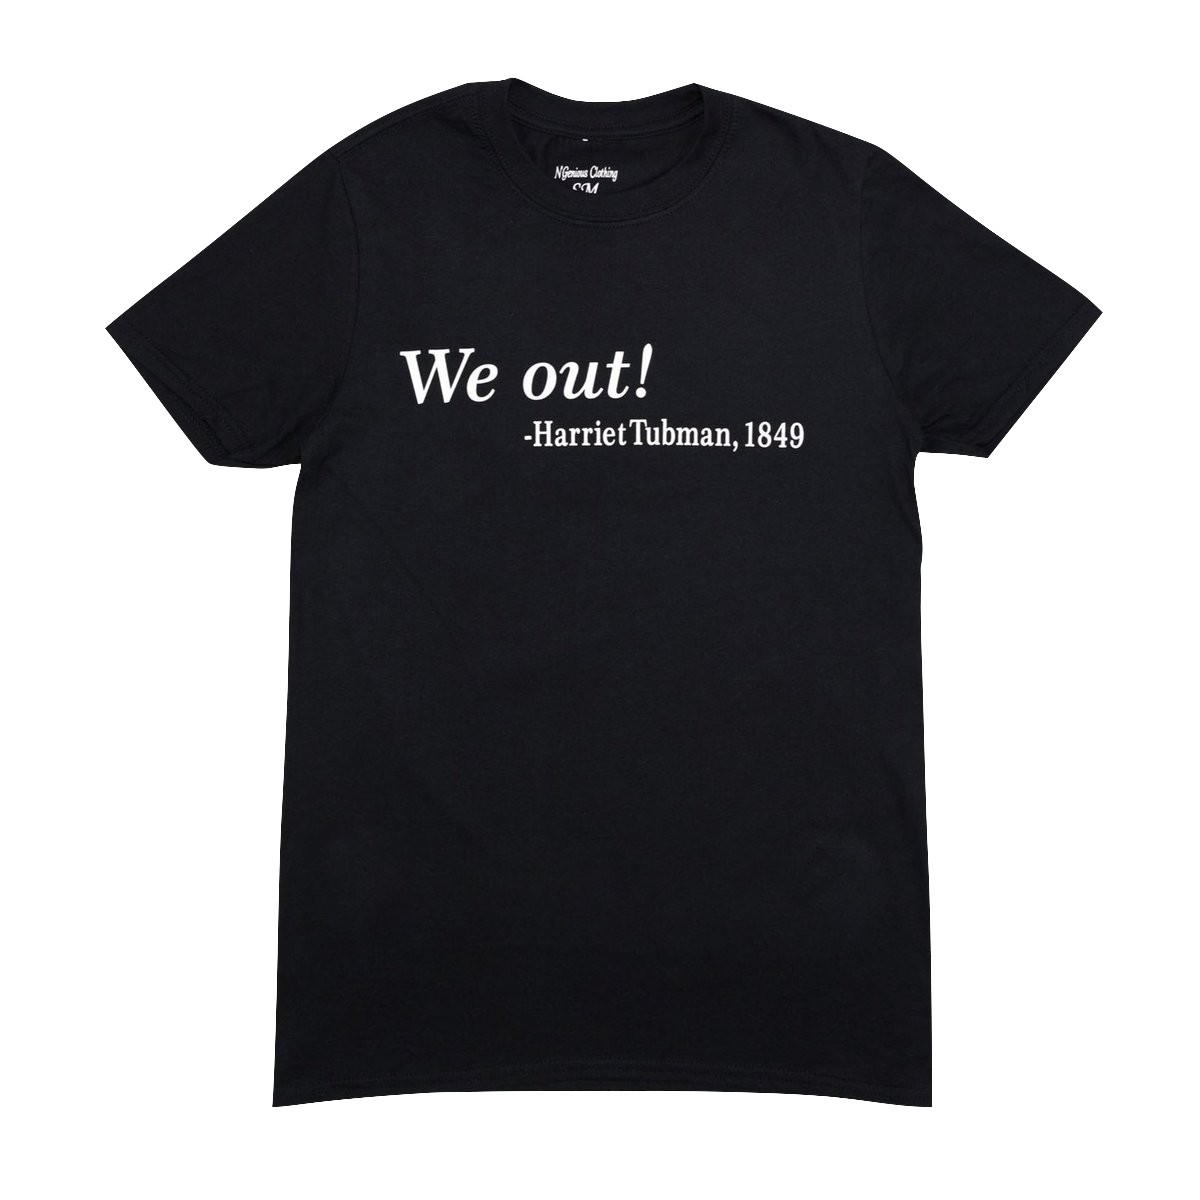 Ngenious Creations | "We Out!" Harriet Tubman Tee